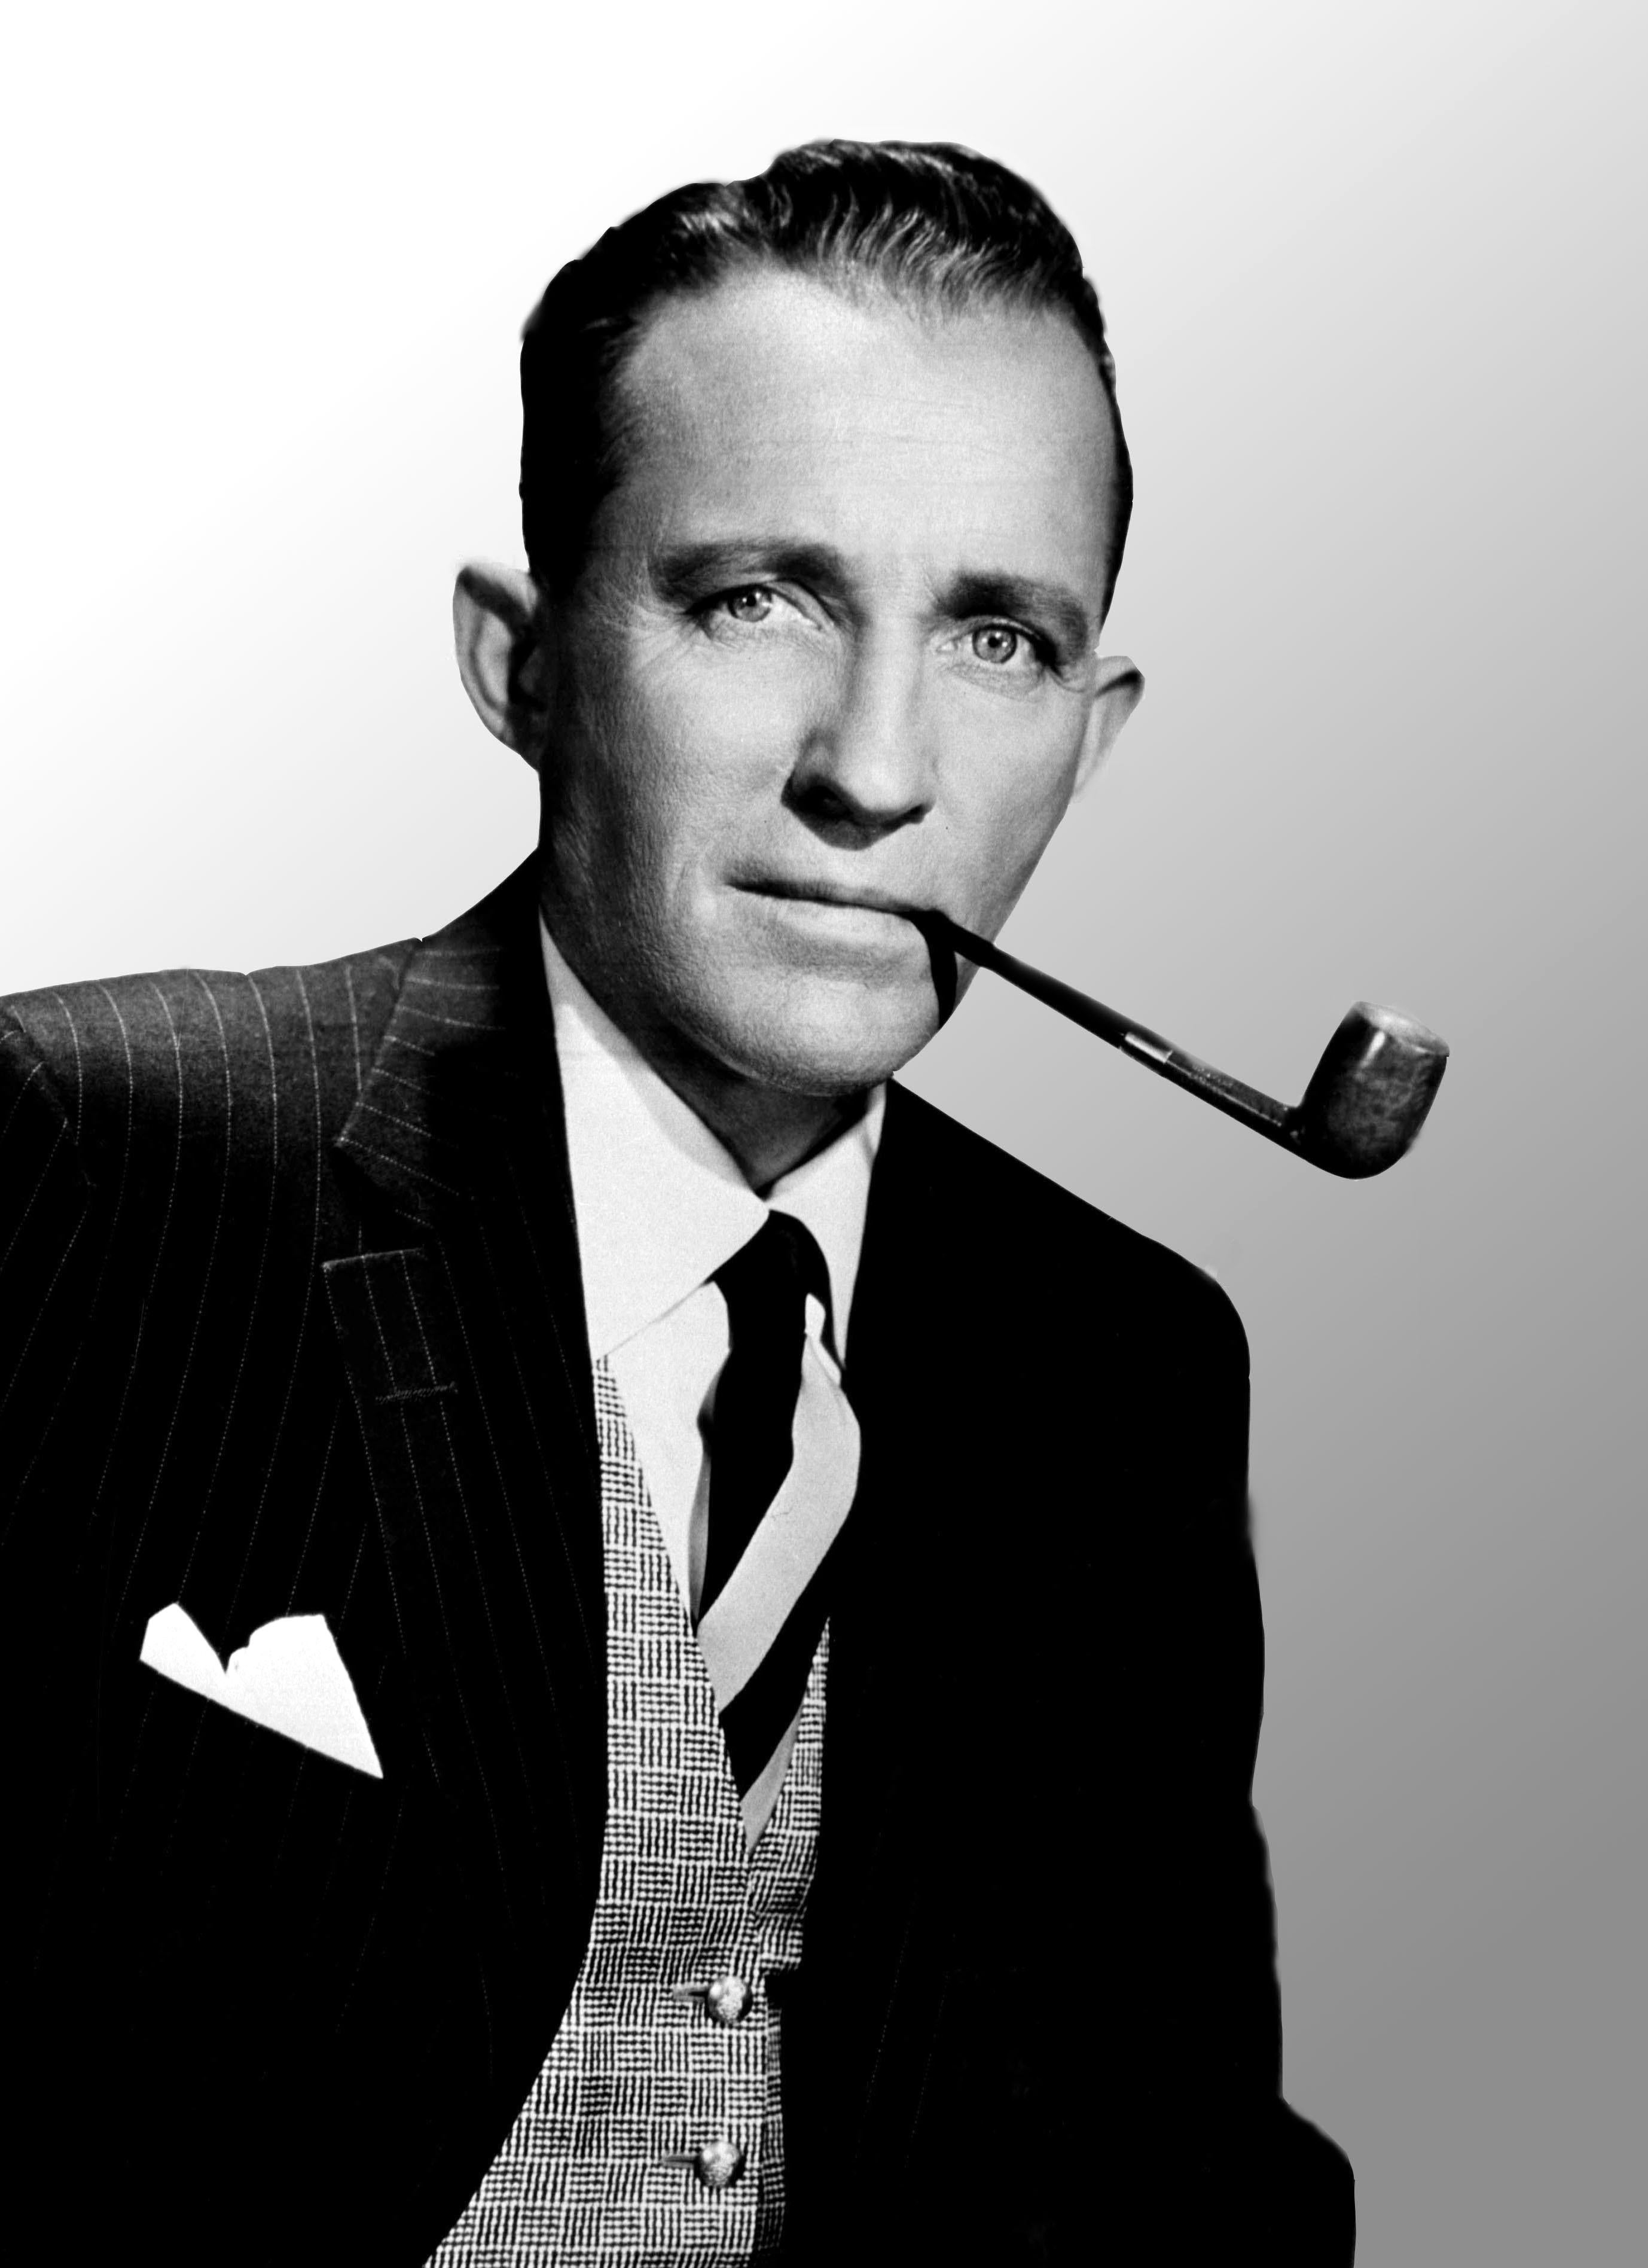 Unknown Portrait Photograph - Bing Crosby Posed with Pipe Globe Photos Fine Art Print